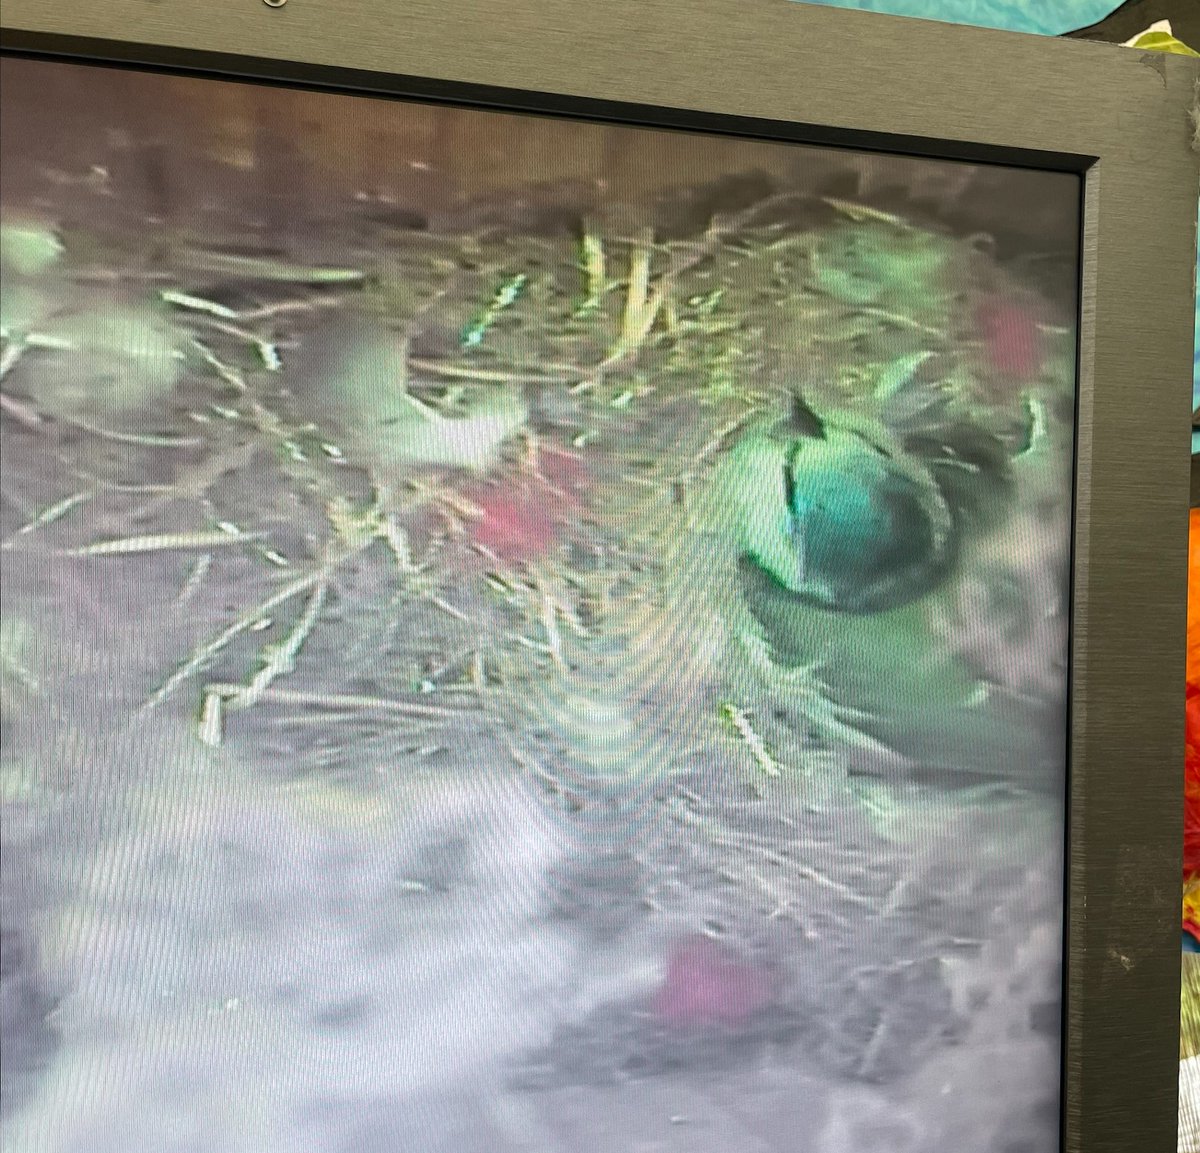 Our birdbox webcam is up and running with a family of bluetits. 8 out of the 10 eggs have so far hatched. The photo isn't too clear but the children have been watching the mother bird bring food for her chicks. #babychicks #springfieldsmiles